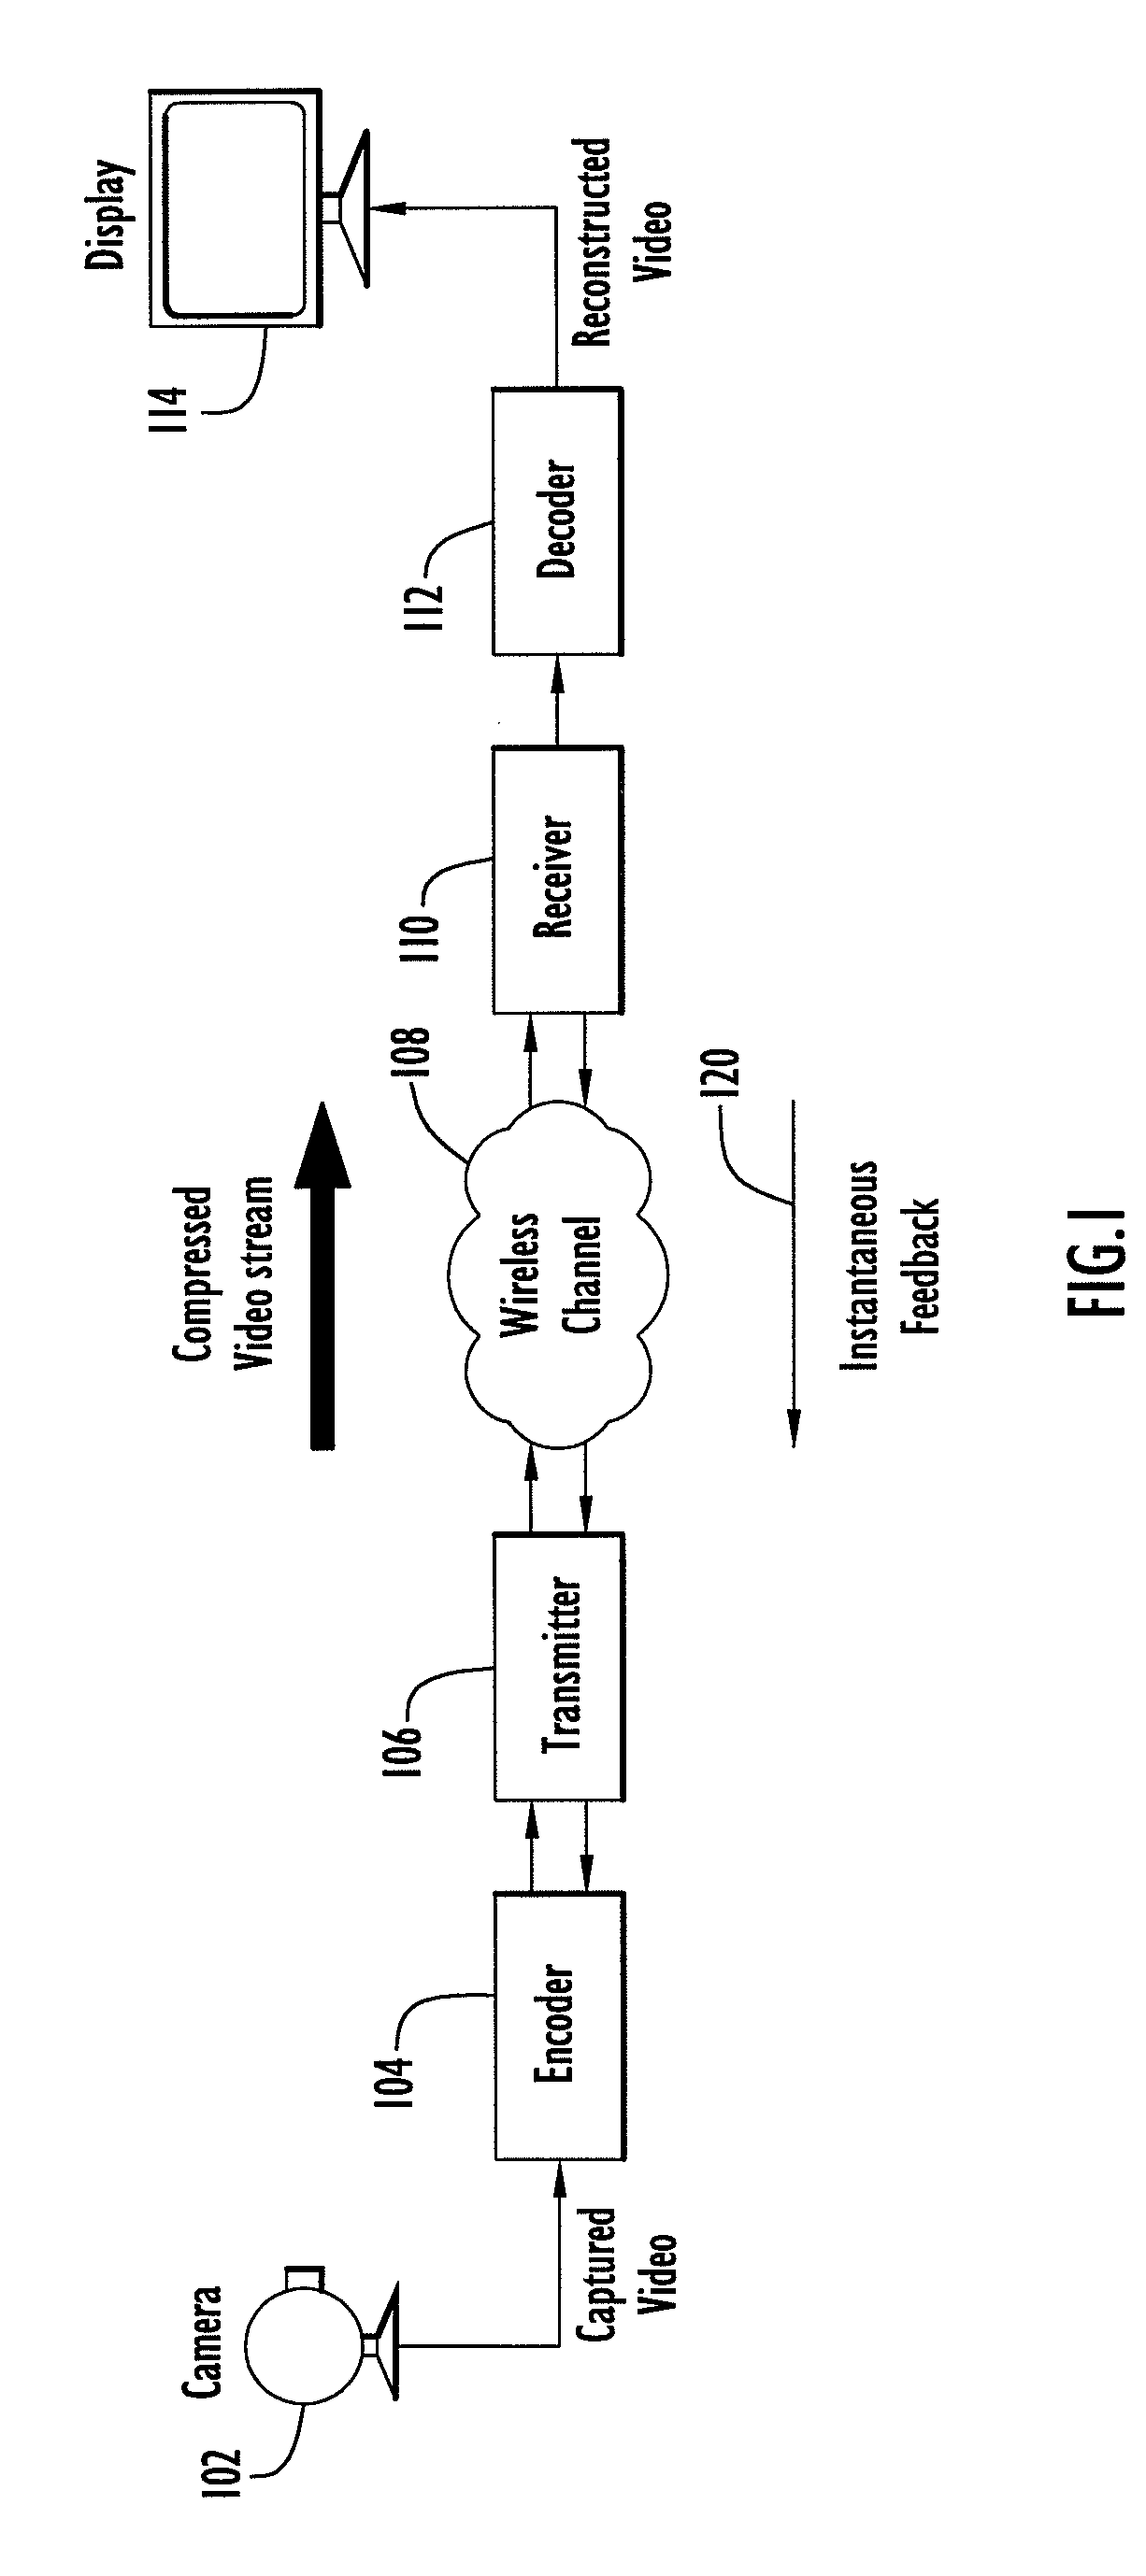 Error Resilient Video Transmission Using Instantaneous Receiver Feedback and Channel Quality Adaptive Packet Retransmission